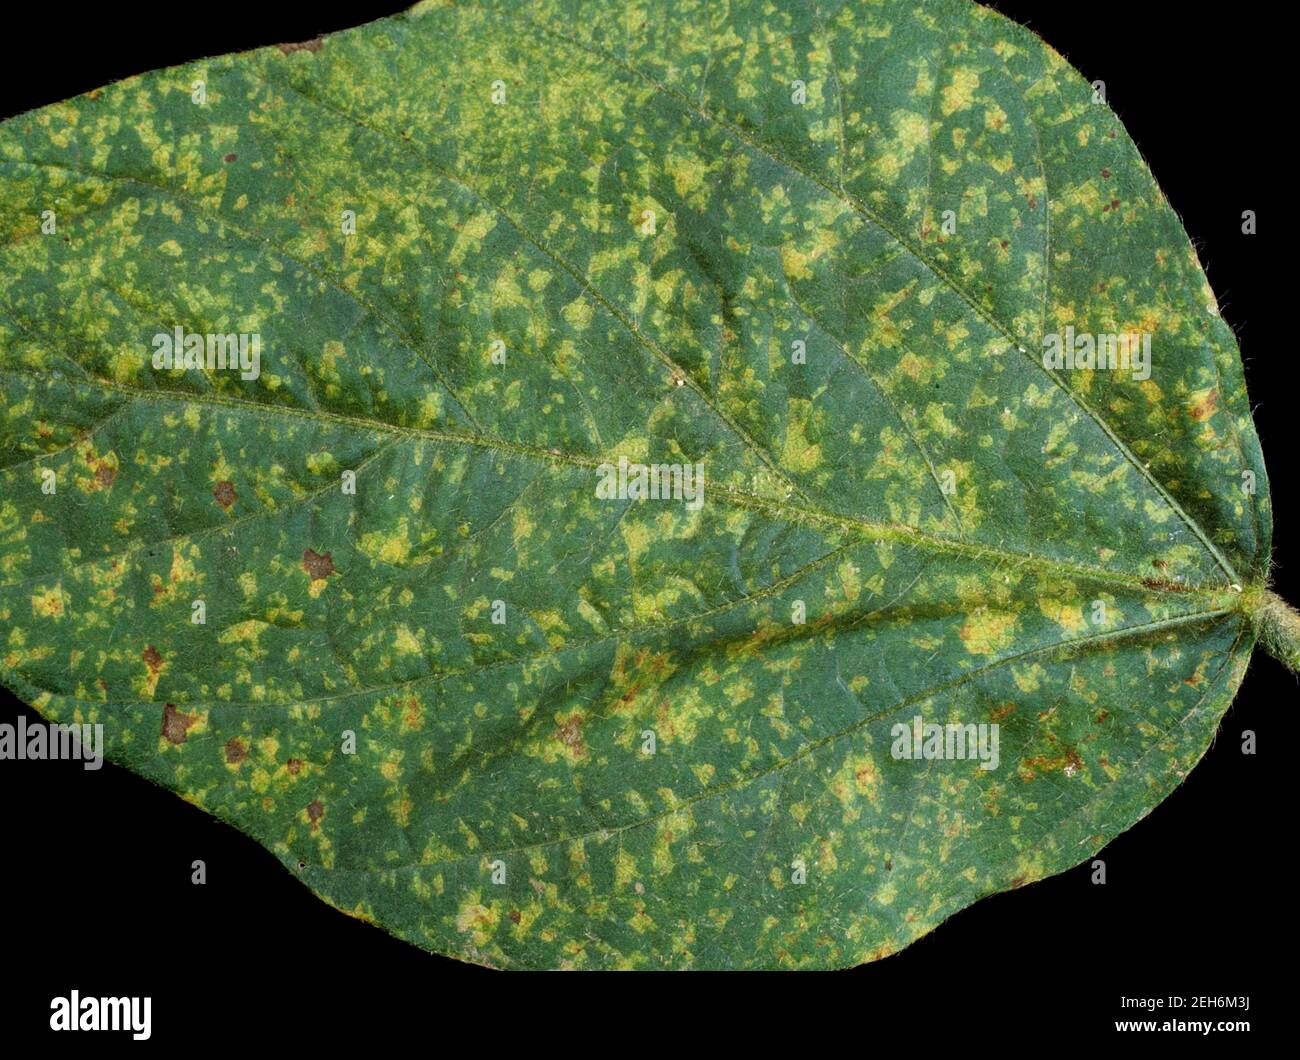 Downy mildew (Peronospora manshurica) disease lesions on on the upper surface of a soyabean leaf, Thailand Stock Photo